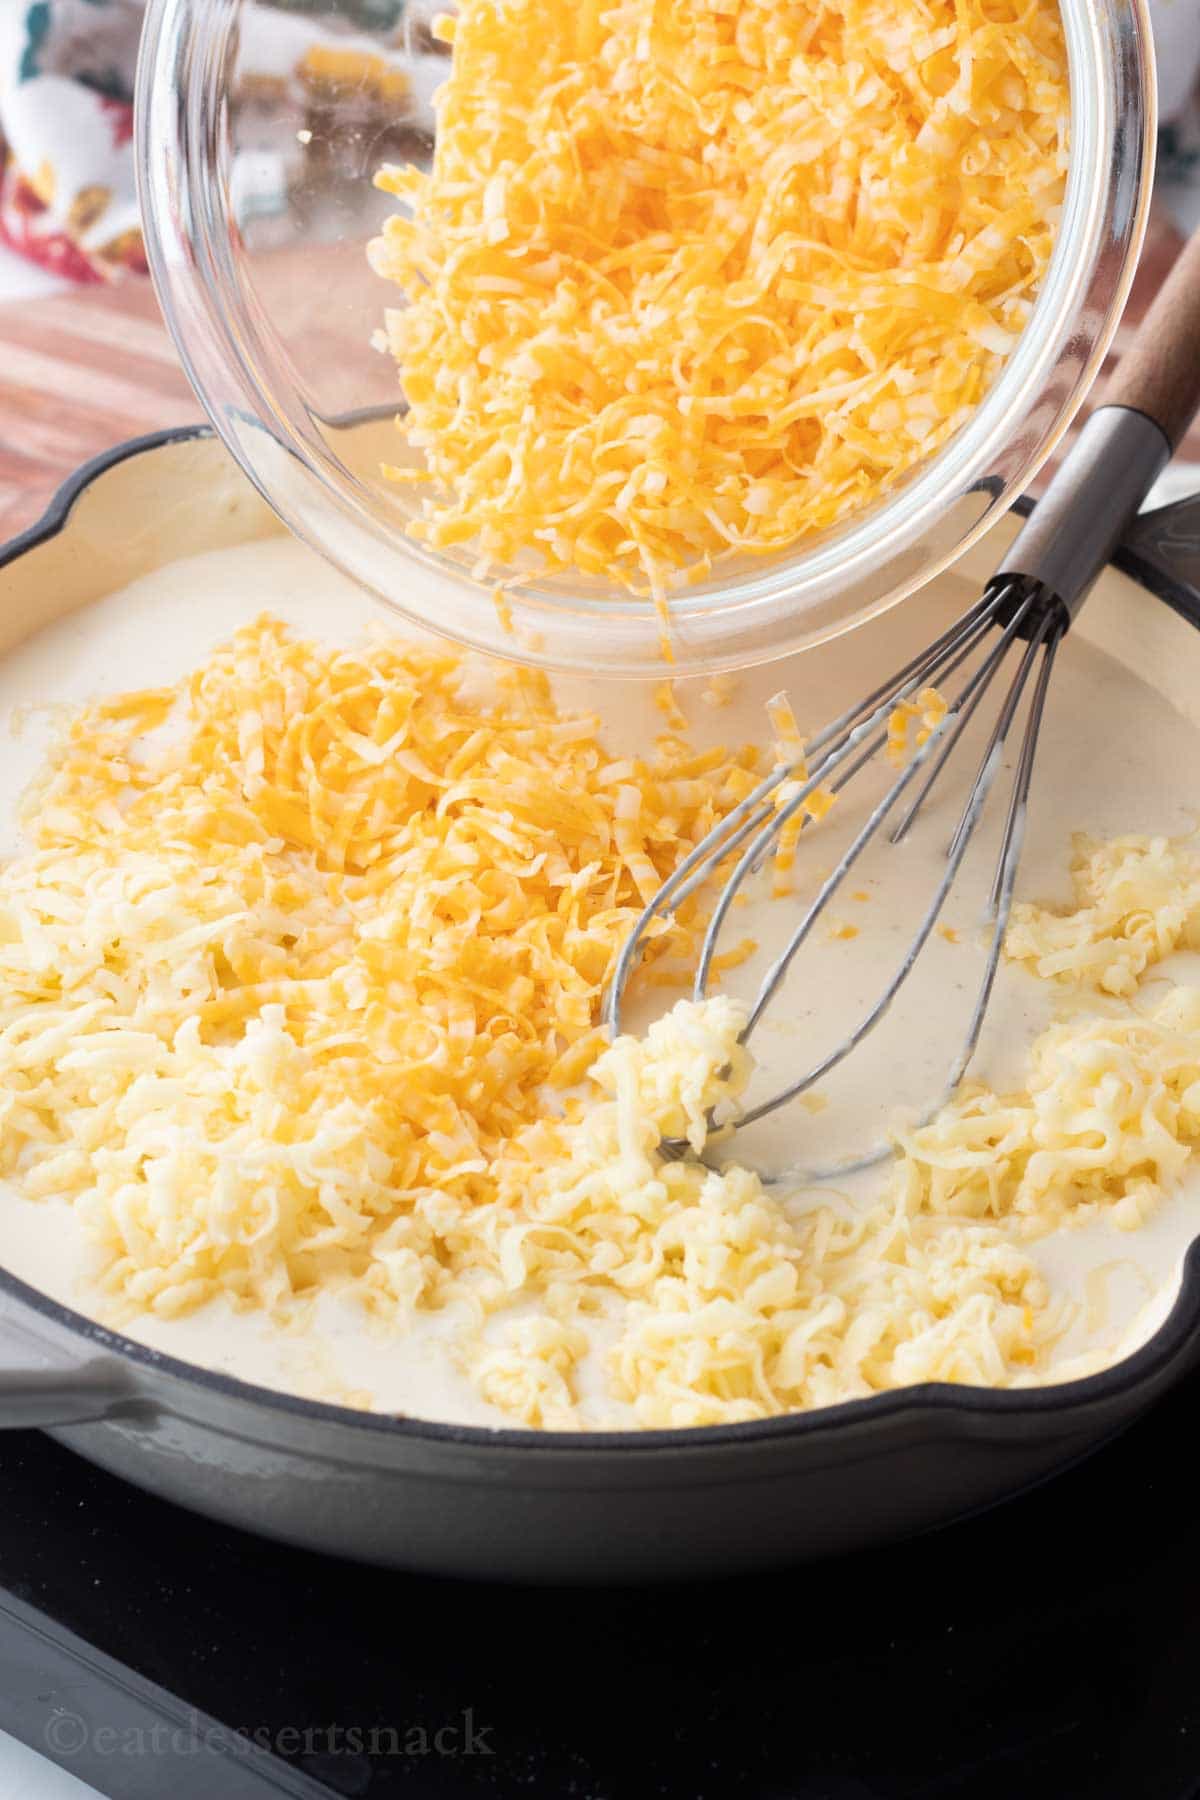 Glass bowl of cheese pouring into frying pan of milk sauce with wire whisk.